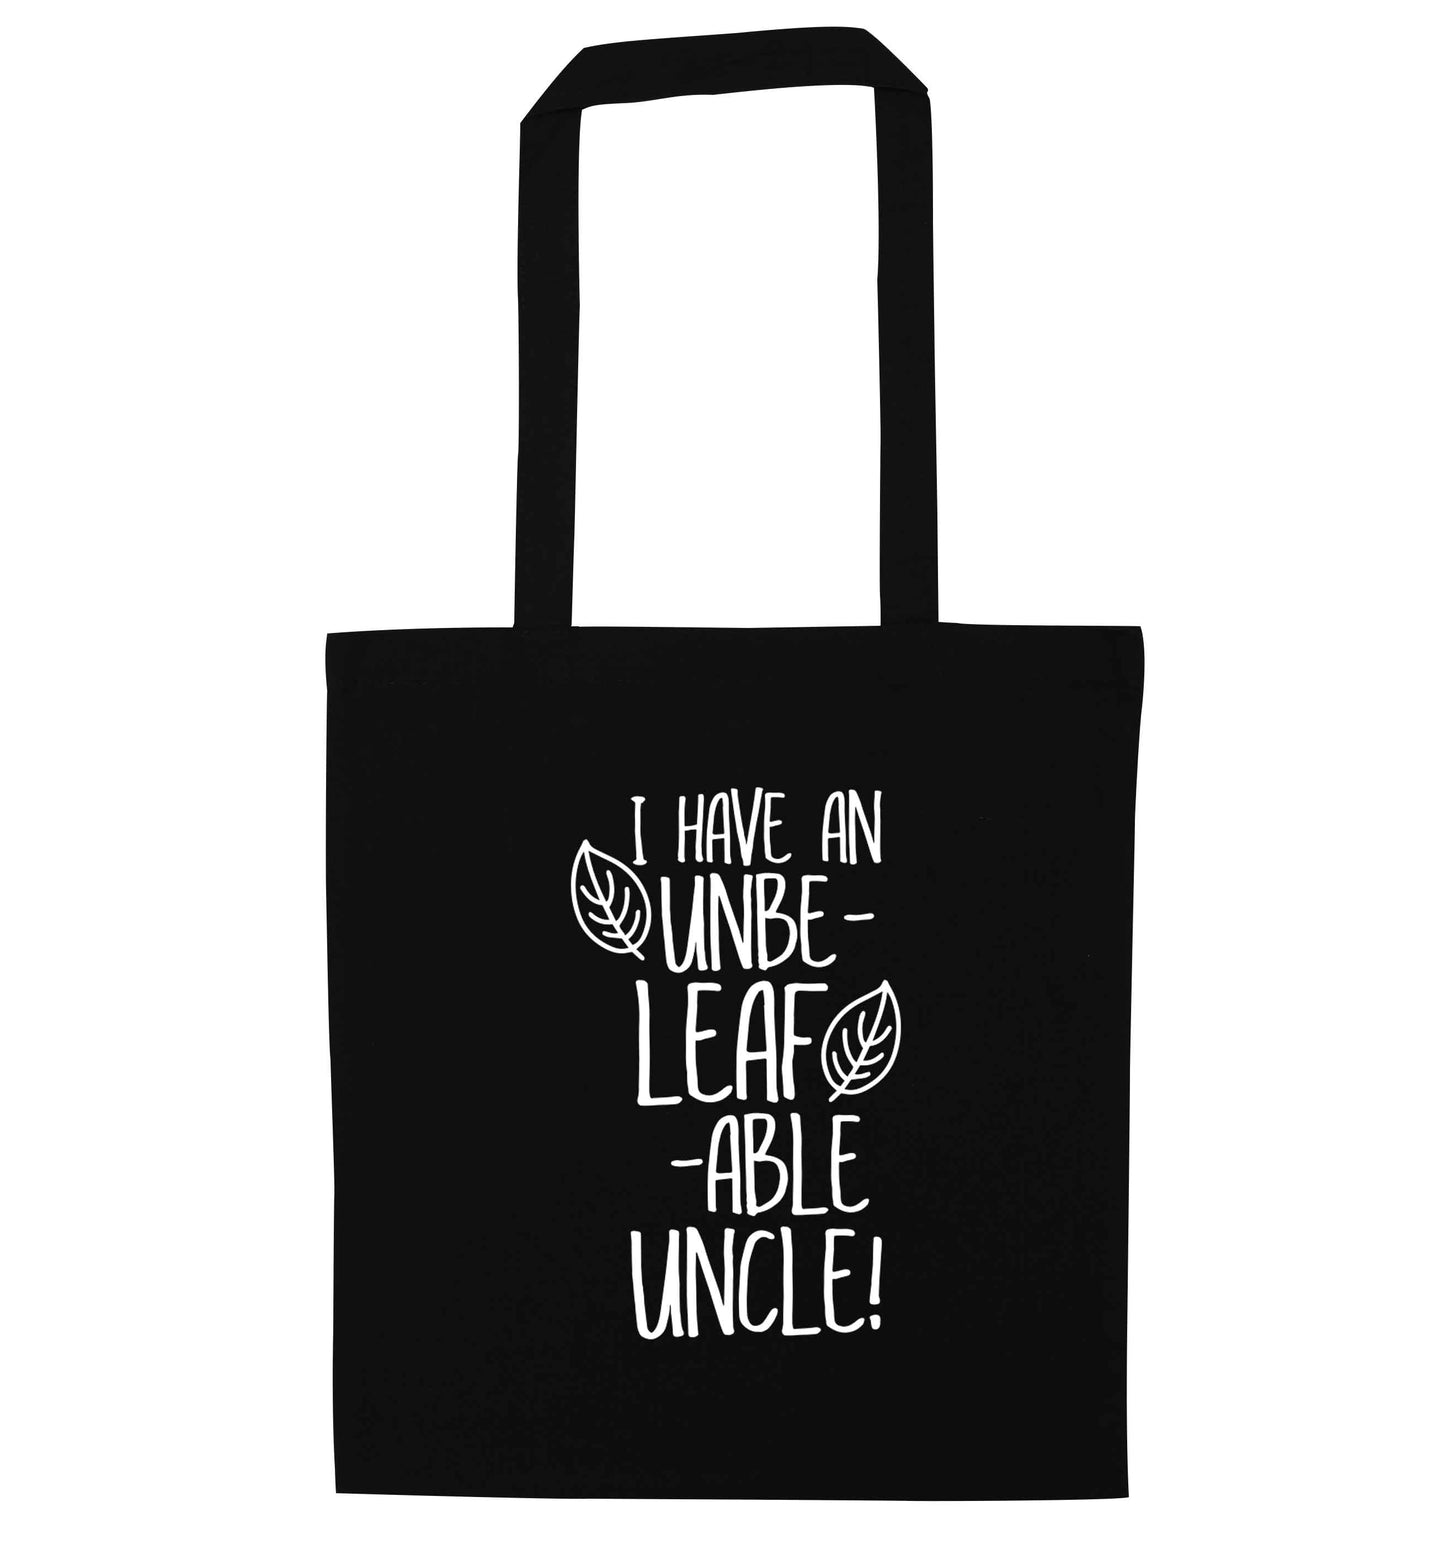 I have an unbe-leaf-able uncle black tote bag